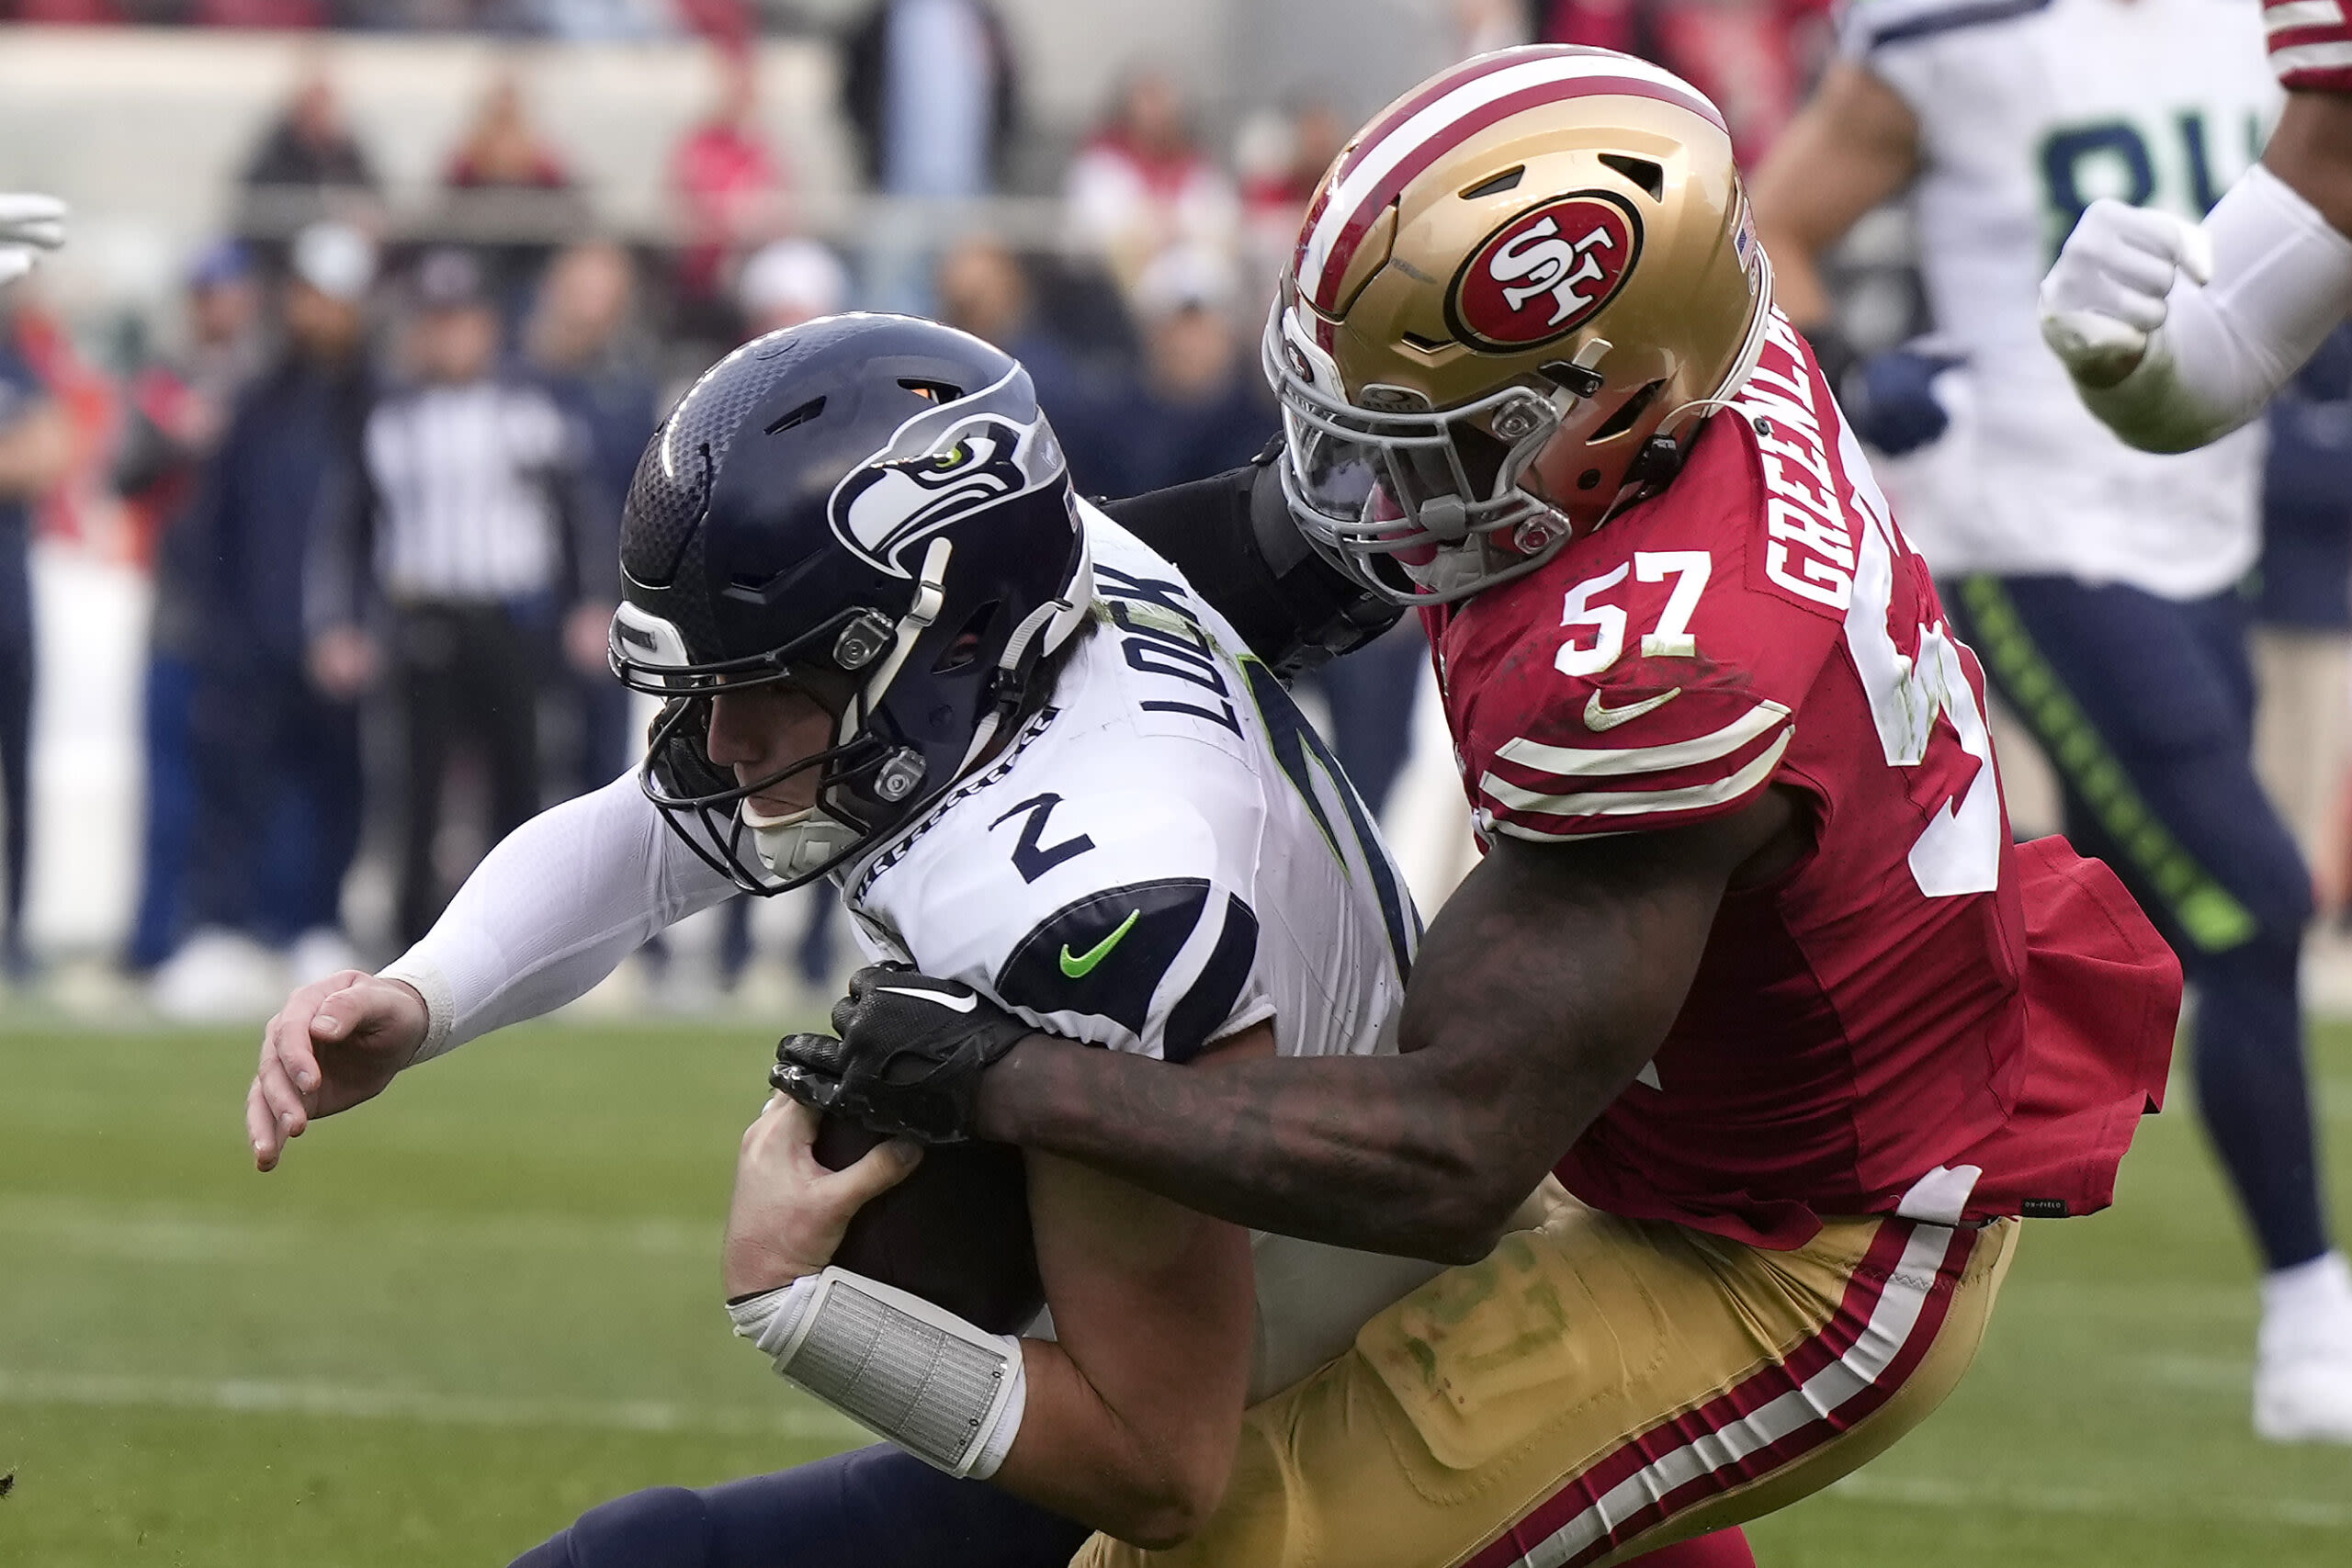 NFC West Watch: 49ers LB Dre Gleenlaw likely to start the season on PUP list